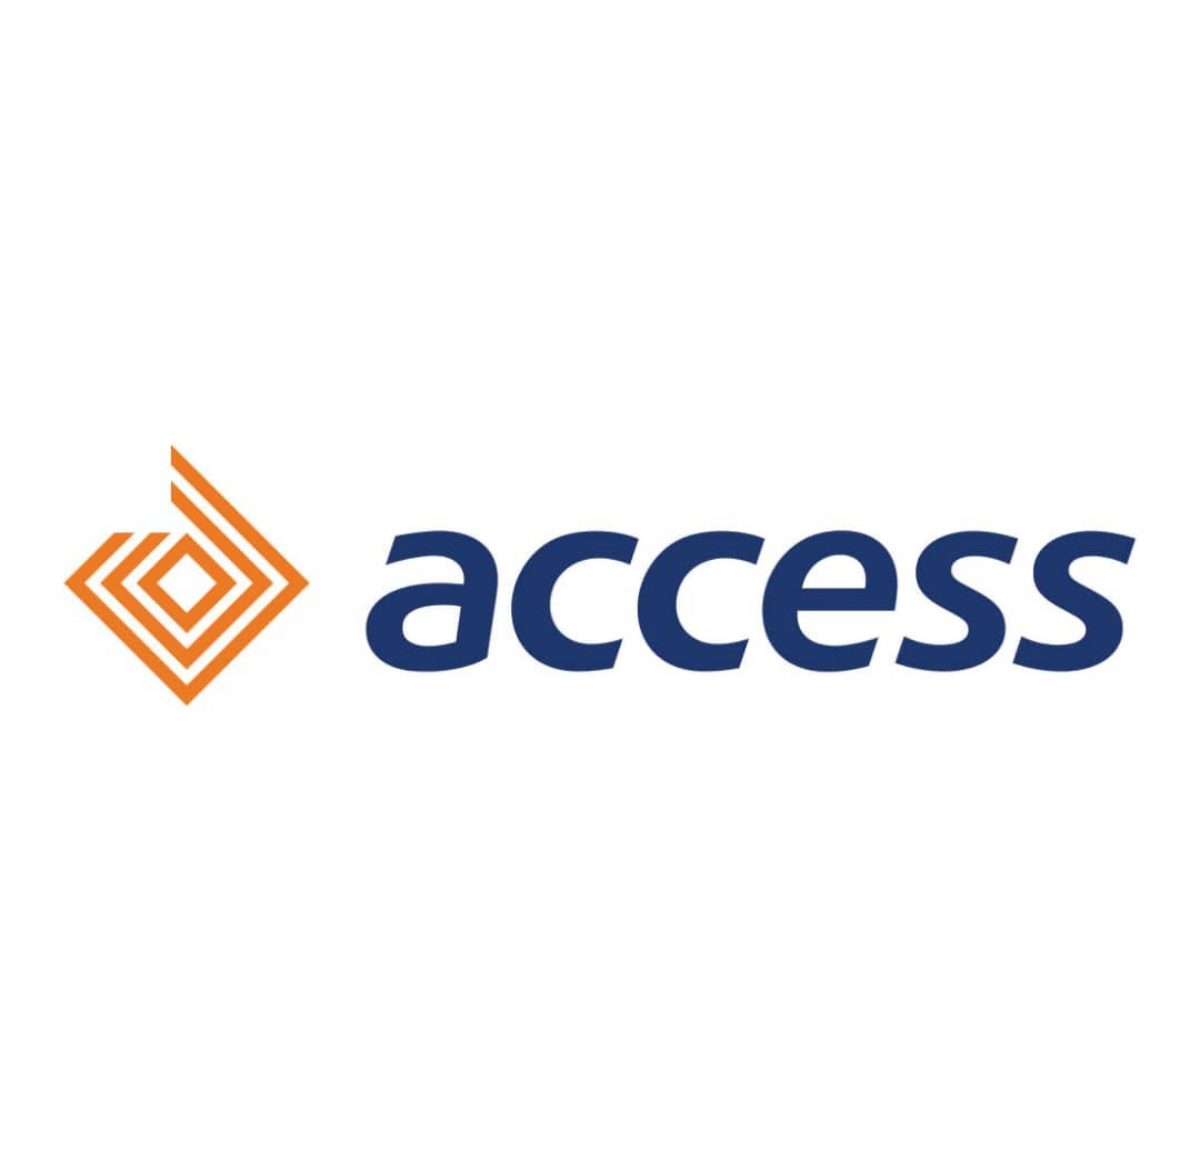 How to Check Access Bank Account Balance on MTN, Airtel & Glo (Simple Steps) – Online, Code, Phone & SMS